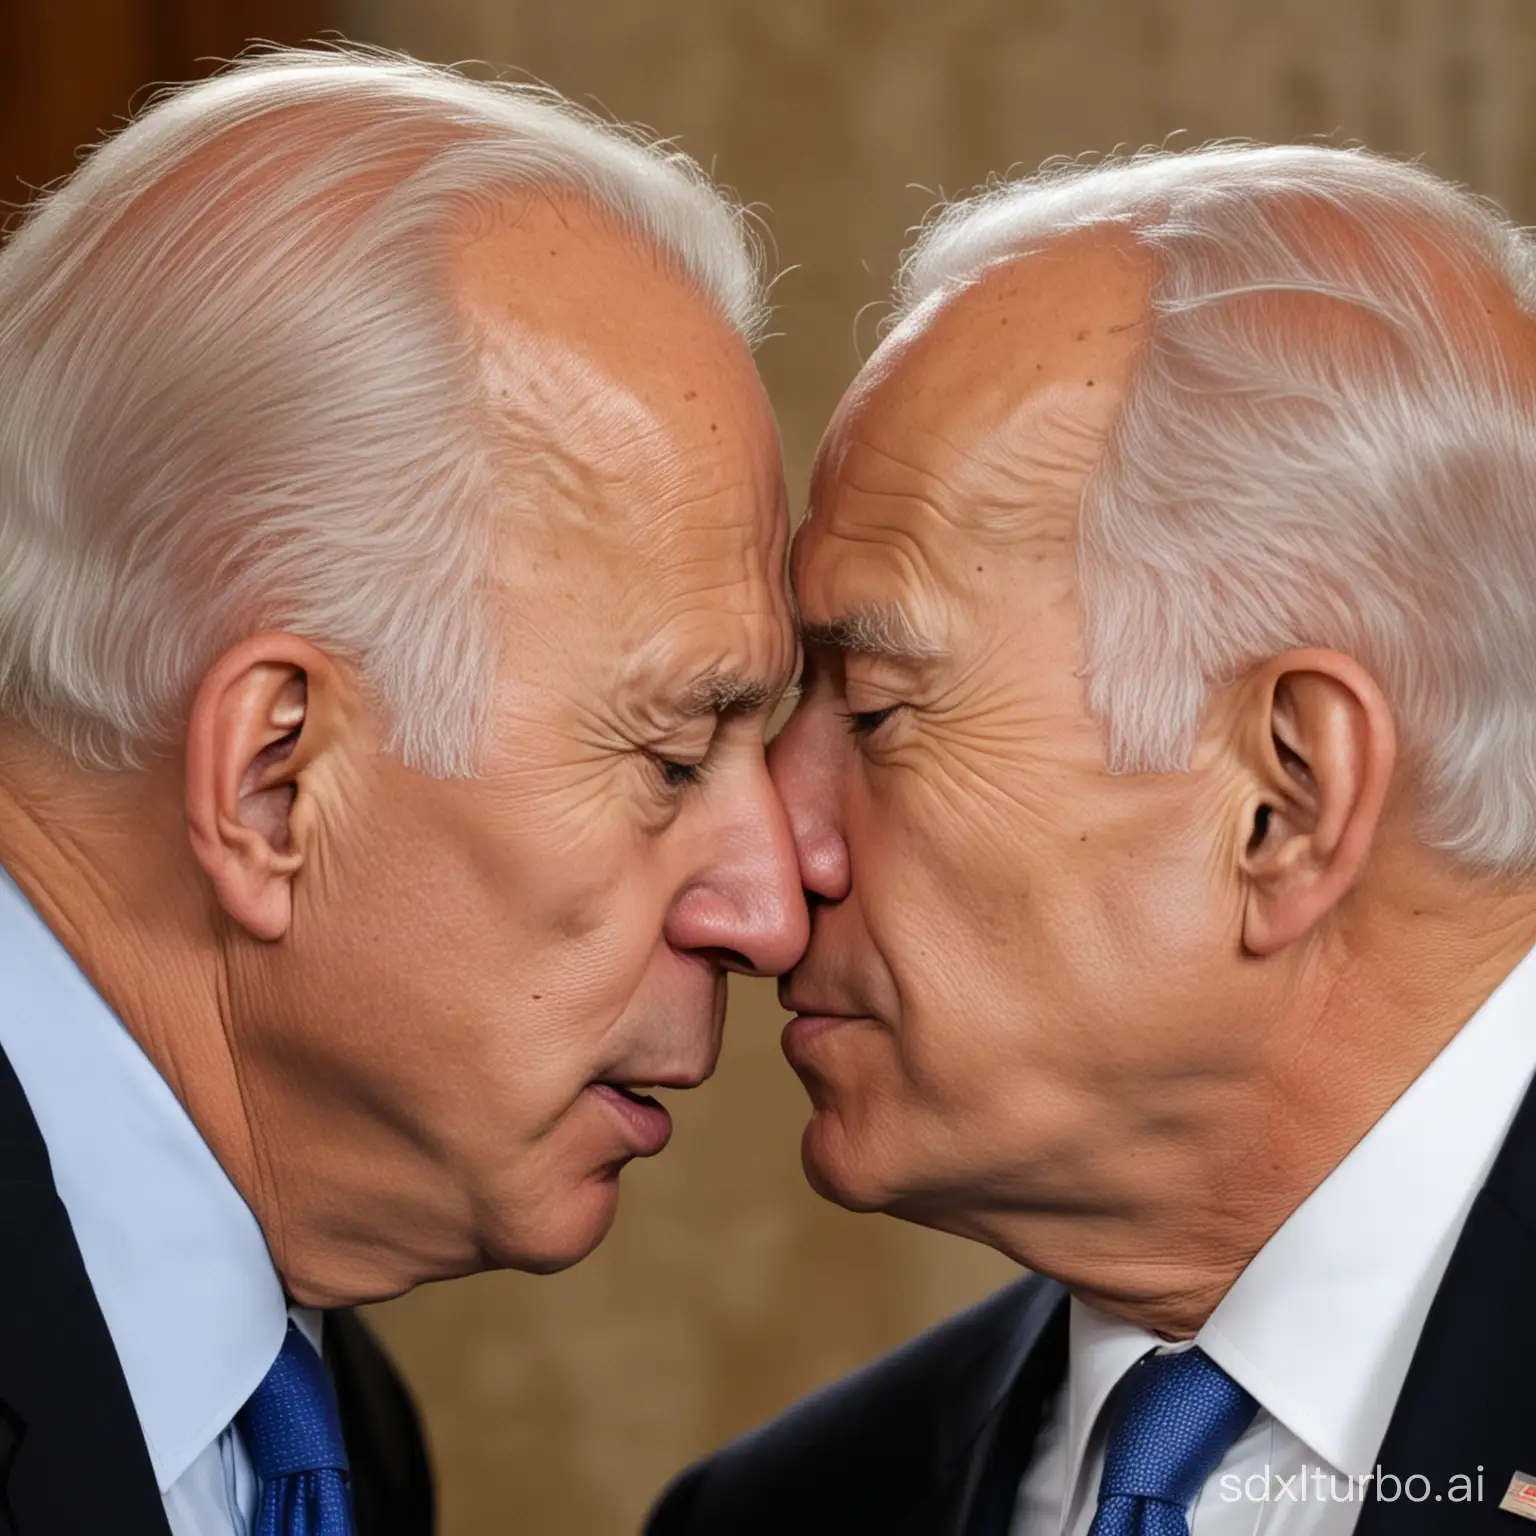 Biden-Affectionately-Embraces-Netanyahu-Diplomatic-Gesture-Captured-in-a-Moment-of-Unity